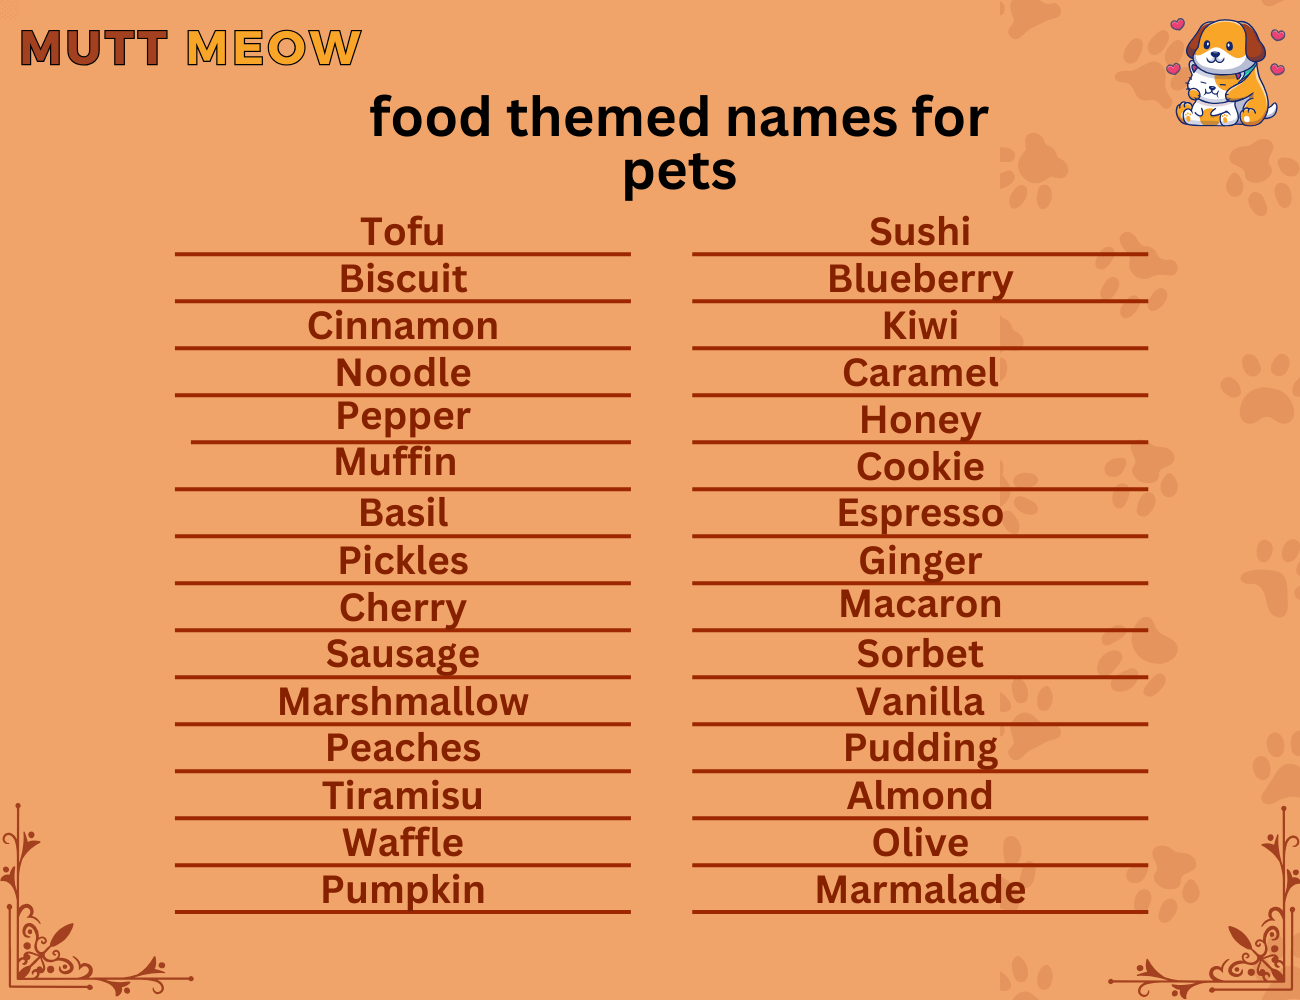 Bulk 1 Food Themed Names For Pets 2 